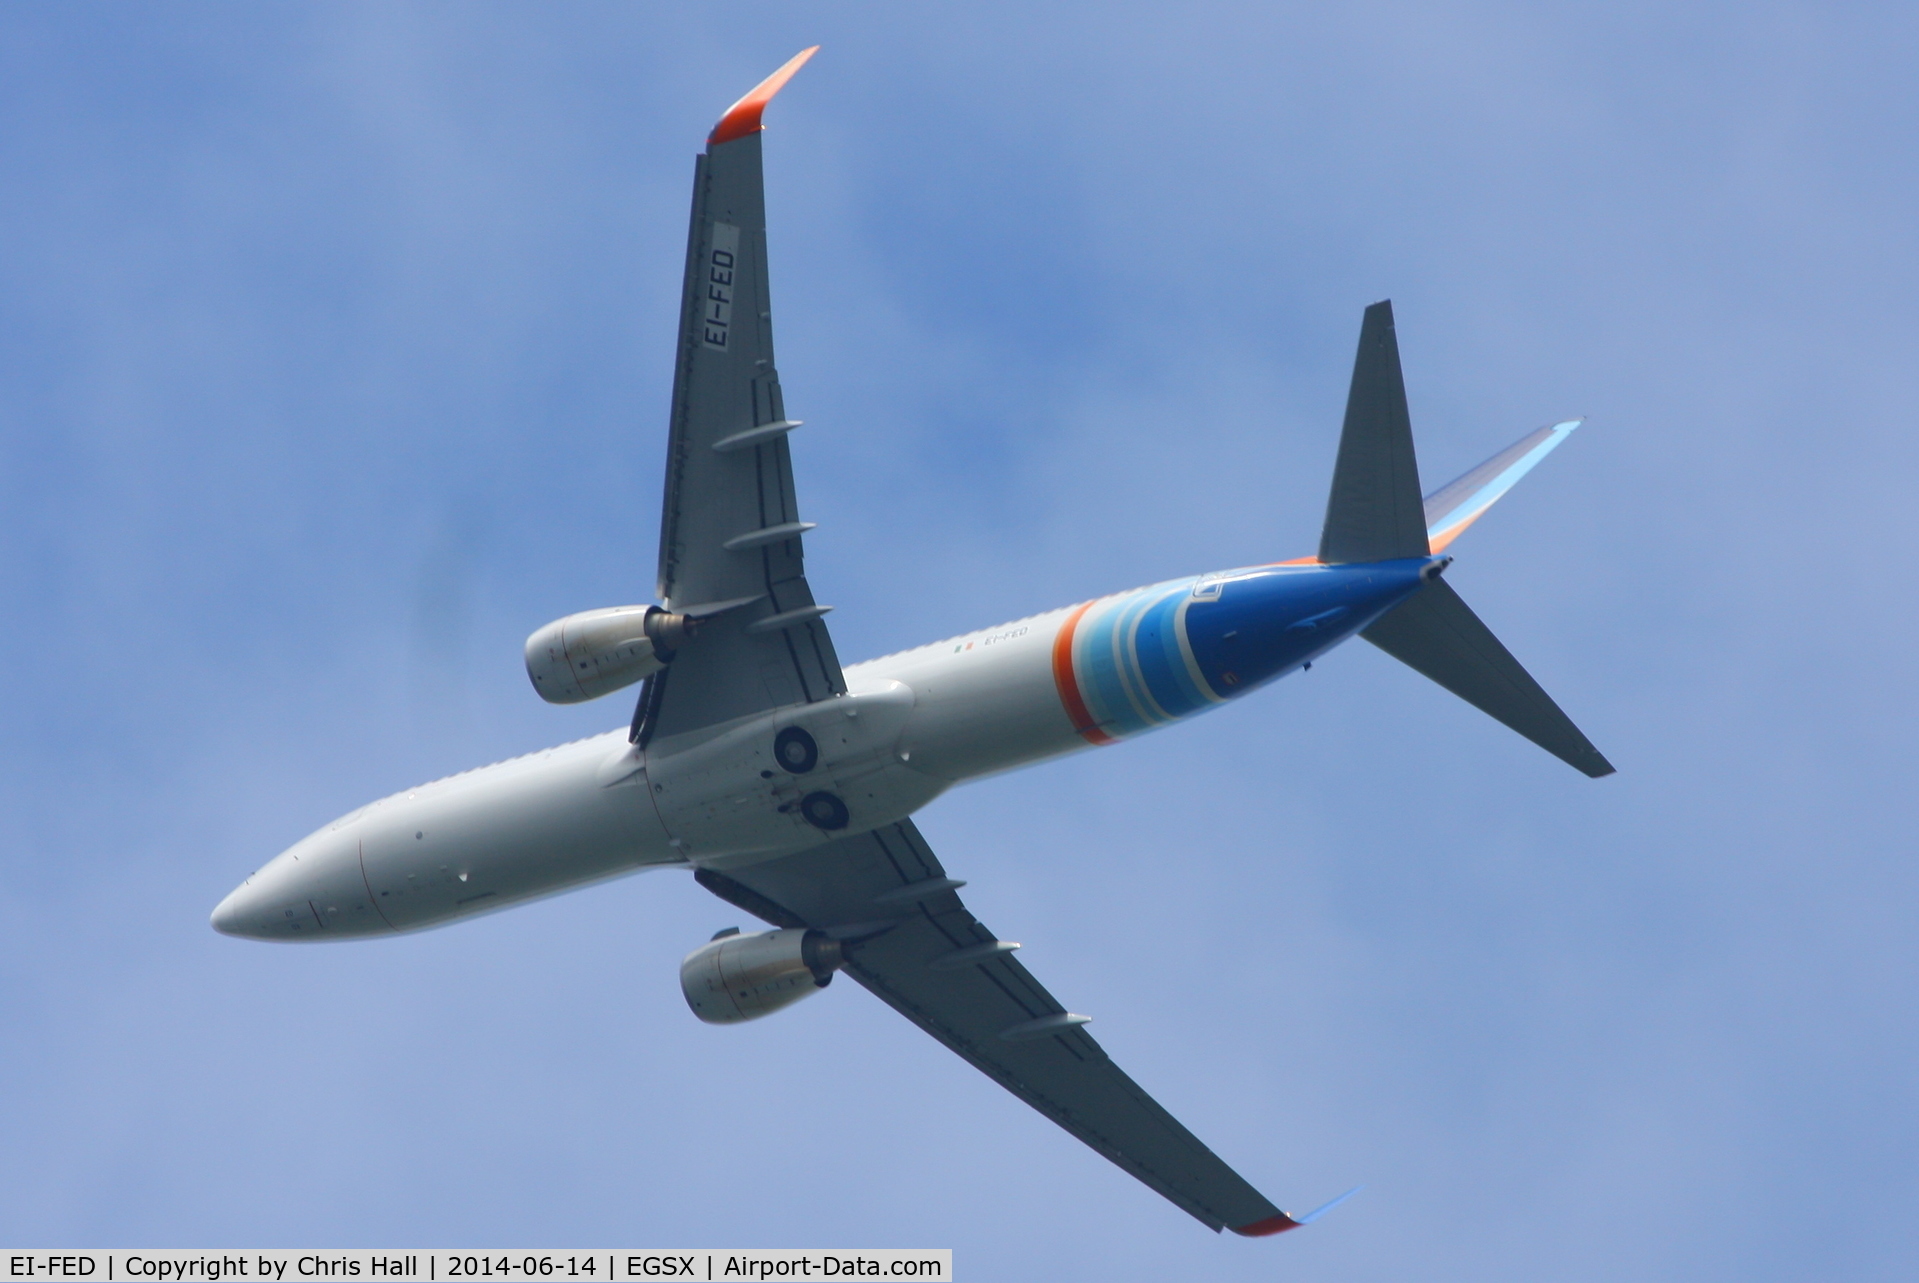 EI-FED, 2009 Boeing 737-8KN C/N 40236, Ryanair B737 leased from flydubai, over North Weald airfield inbound to Stansted